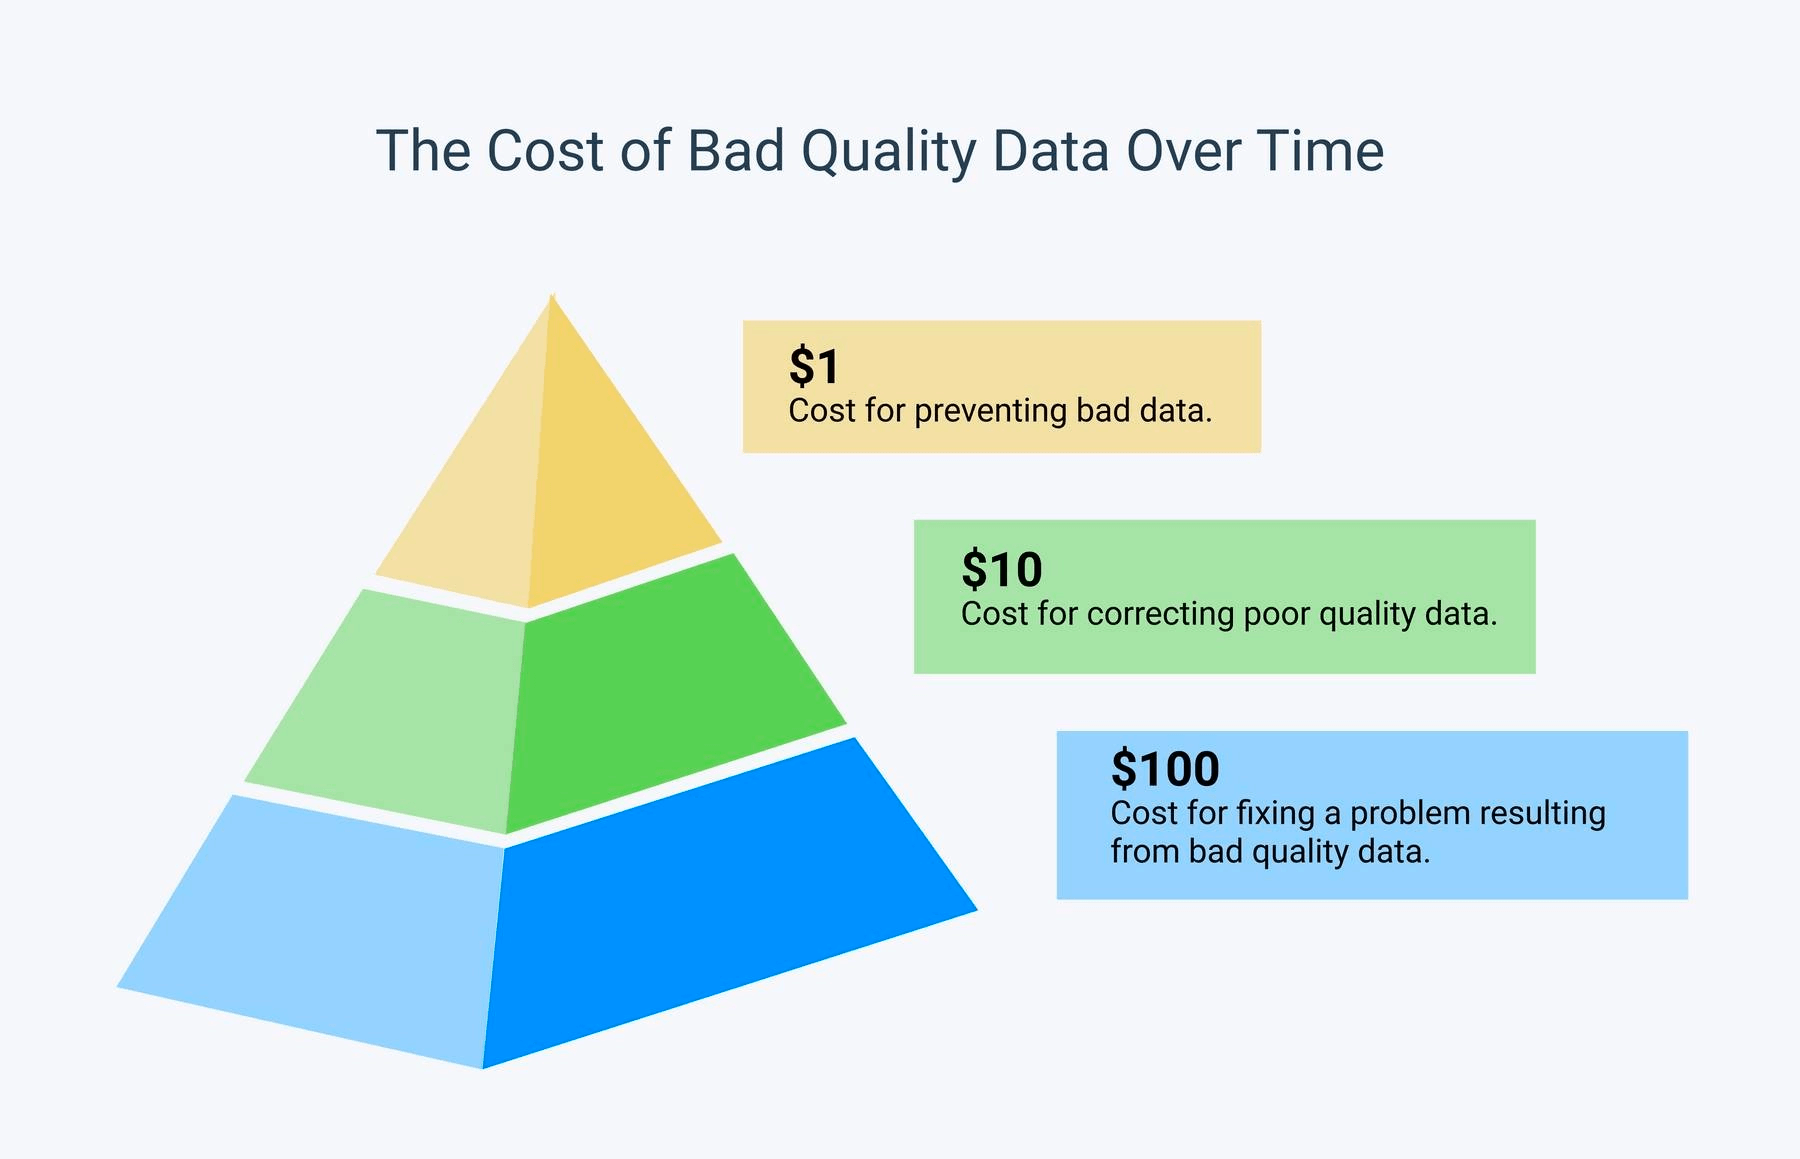 $1 cost for preventing bad data. $10 cost for correcting bad data. $100 cost for fixing problem caused by bad data.